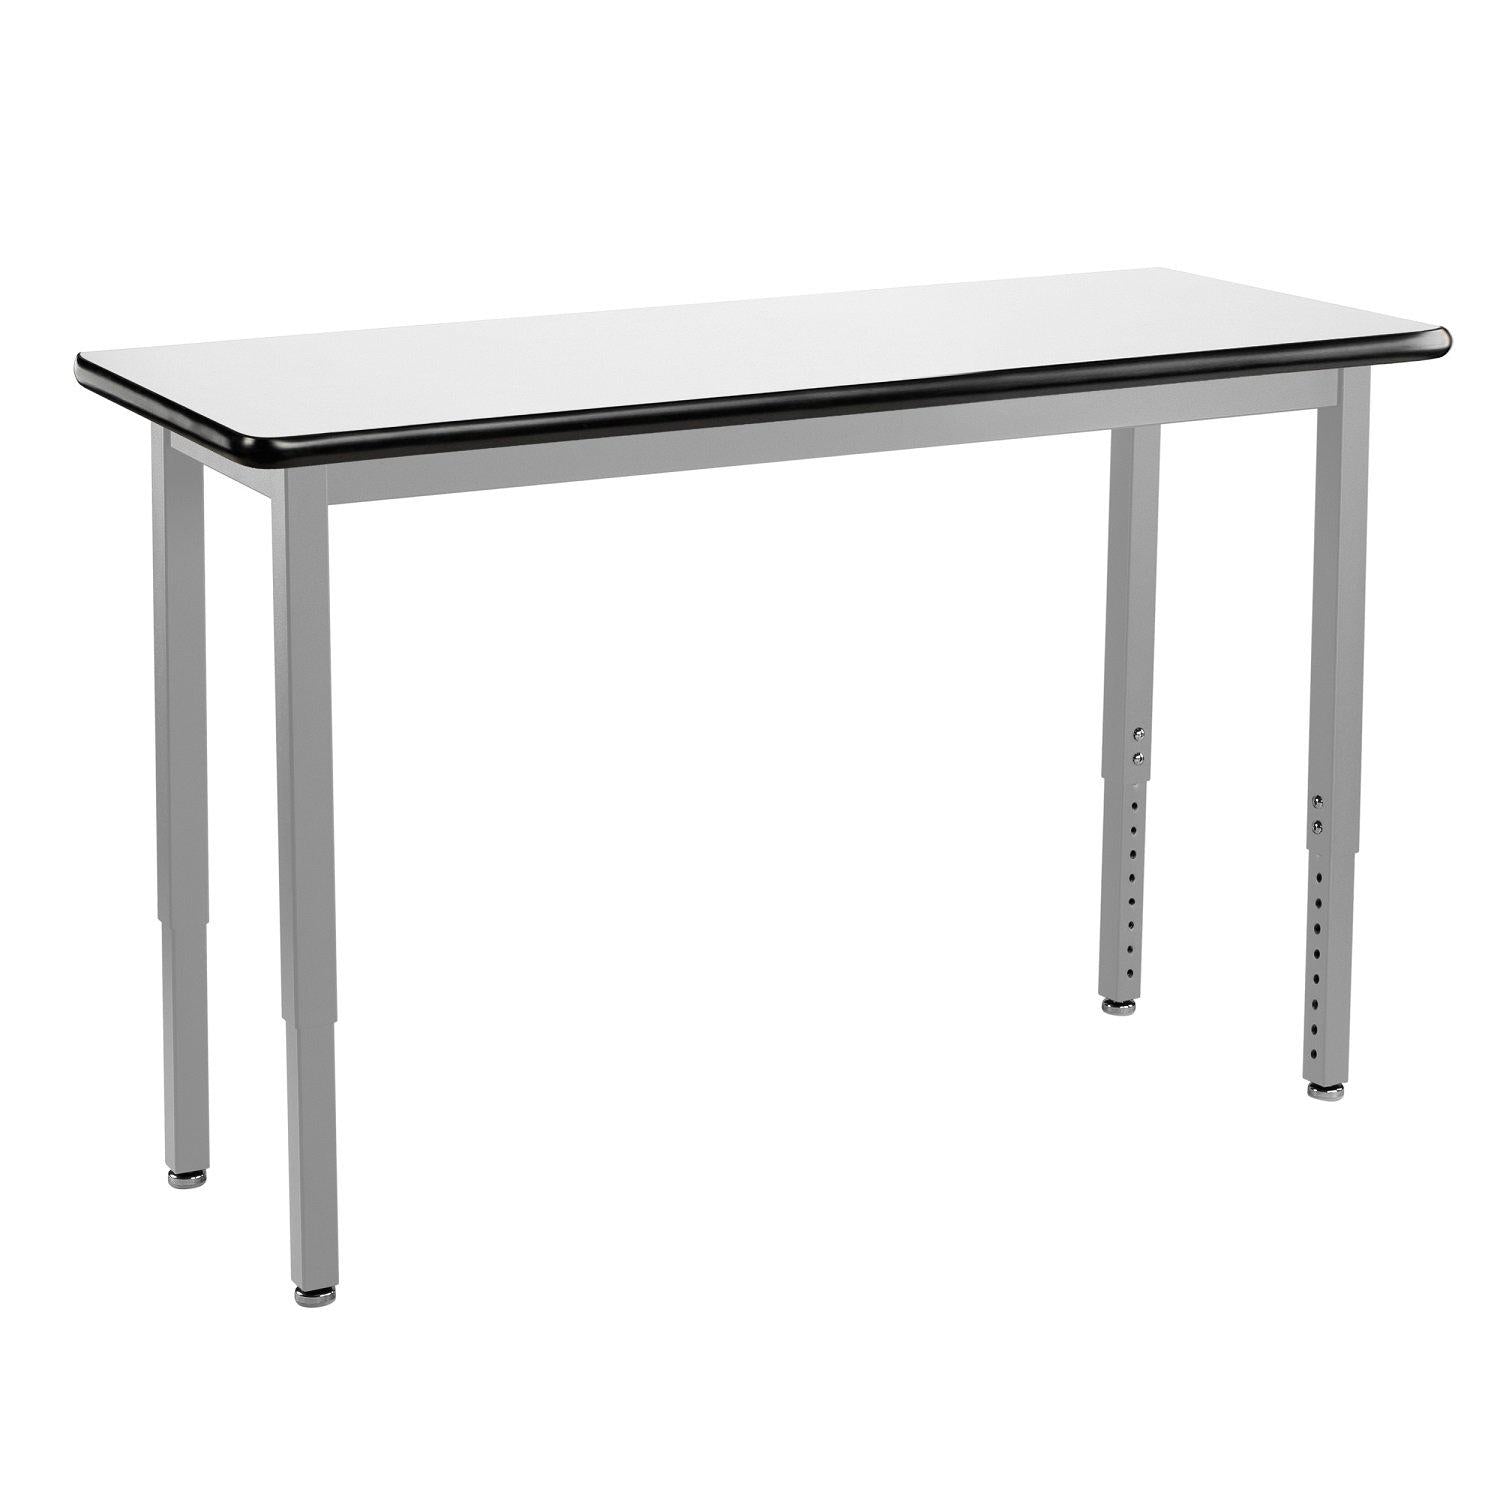 Heavy-Duty Height-Adjustable Utility Table, Soft Grey Frame, 18" x 54", Whiteboard High-Pressure Laminate Top